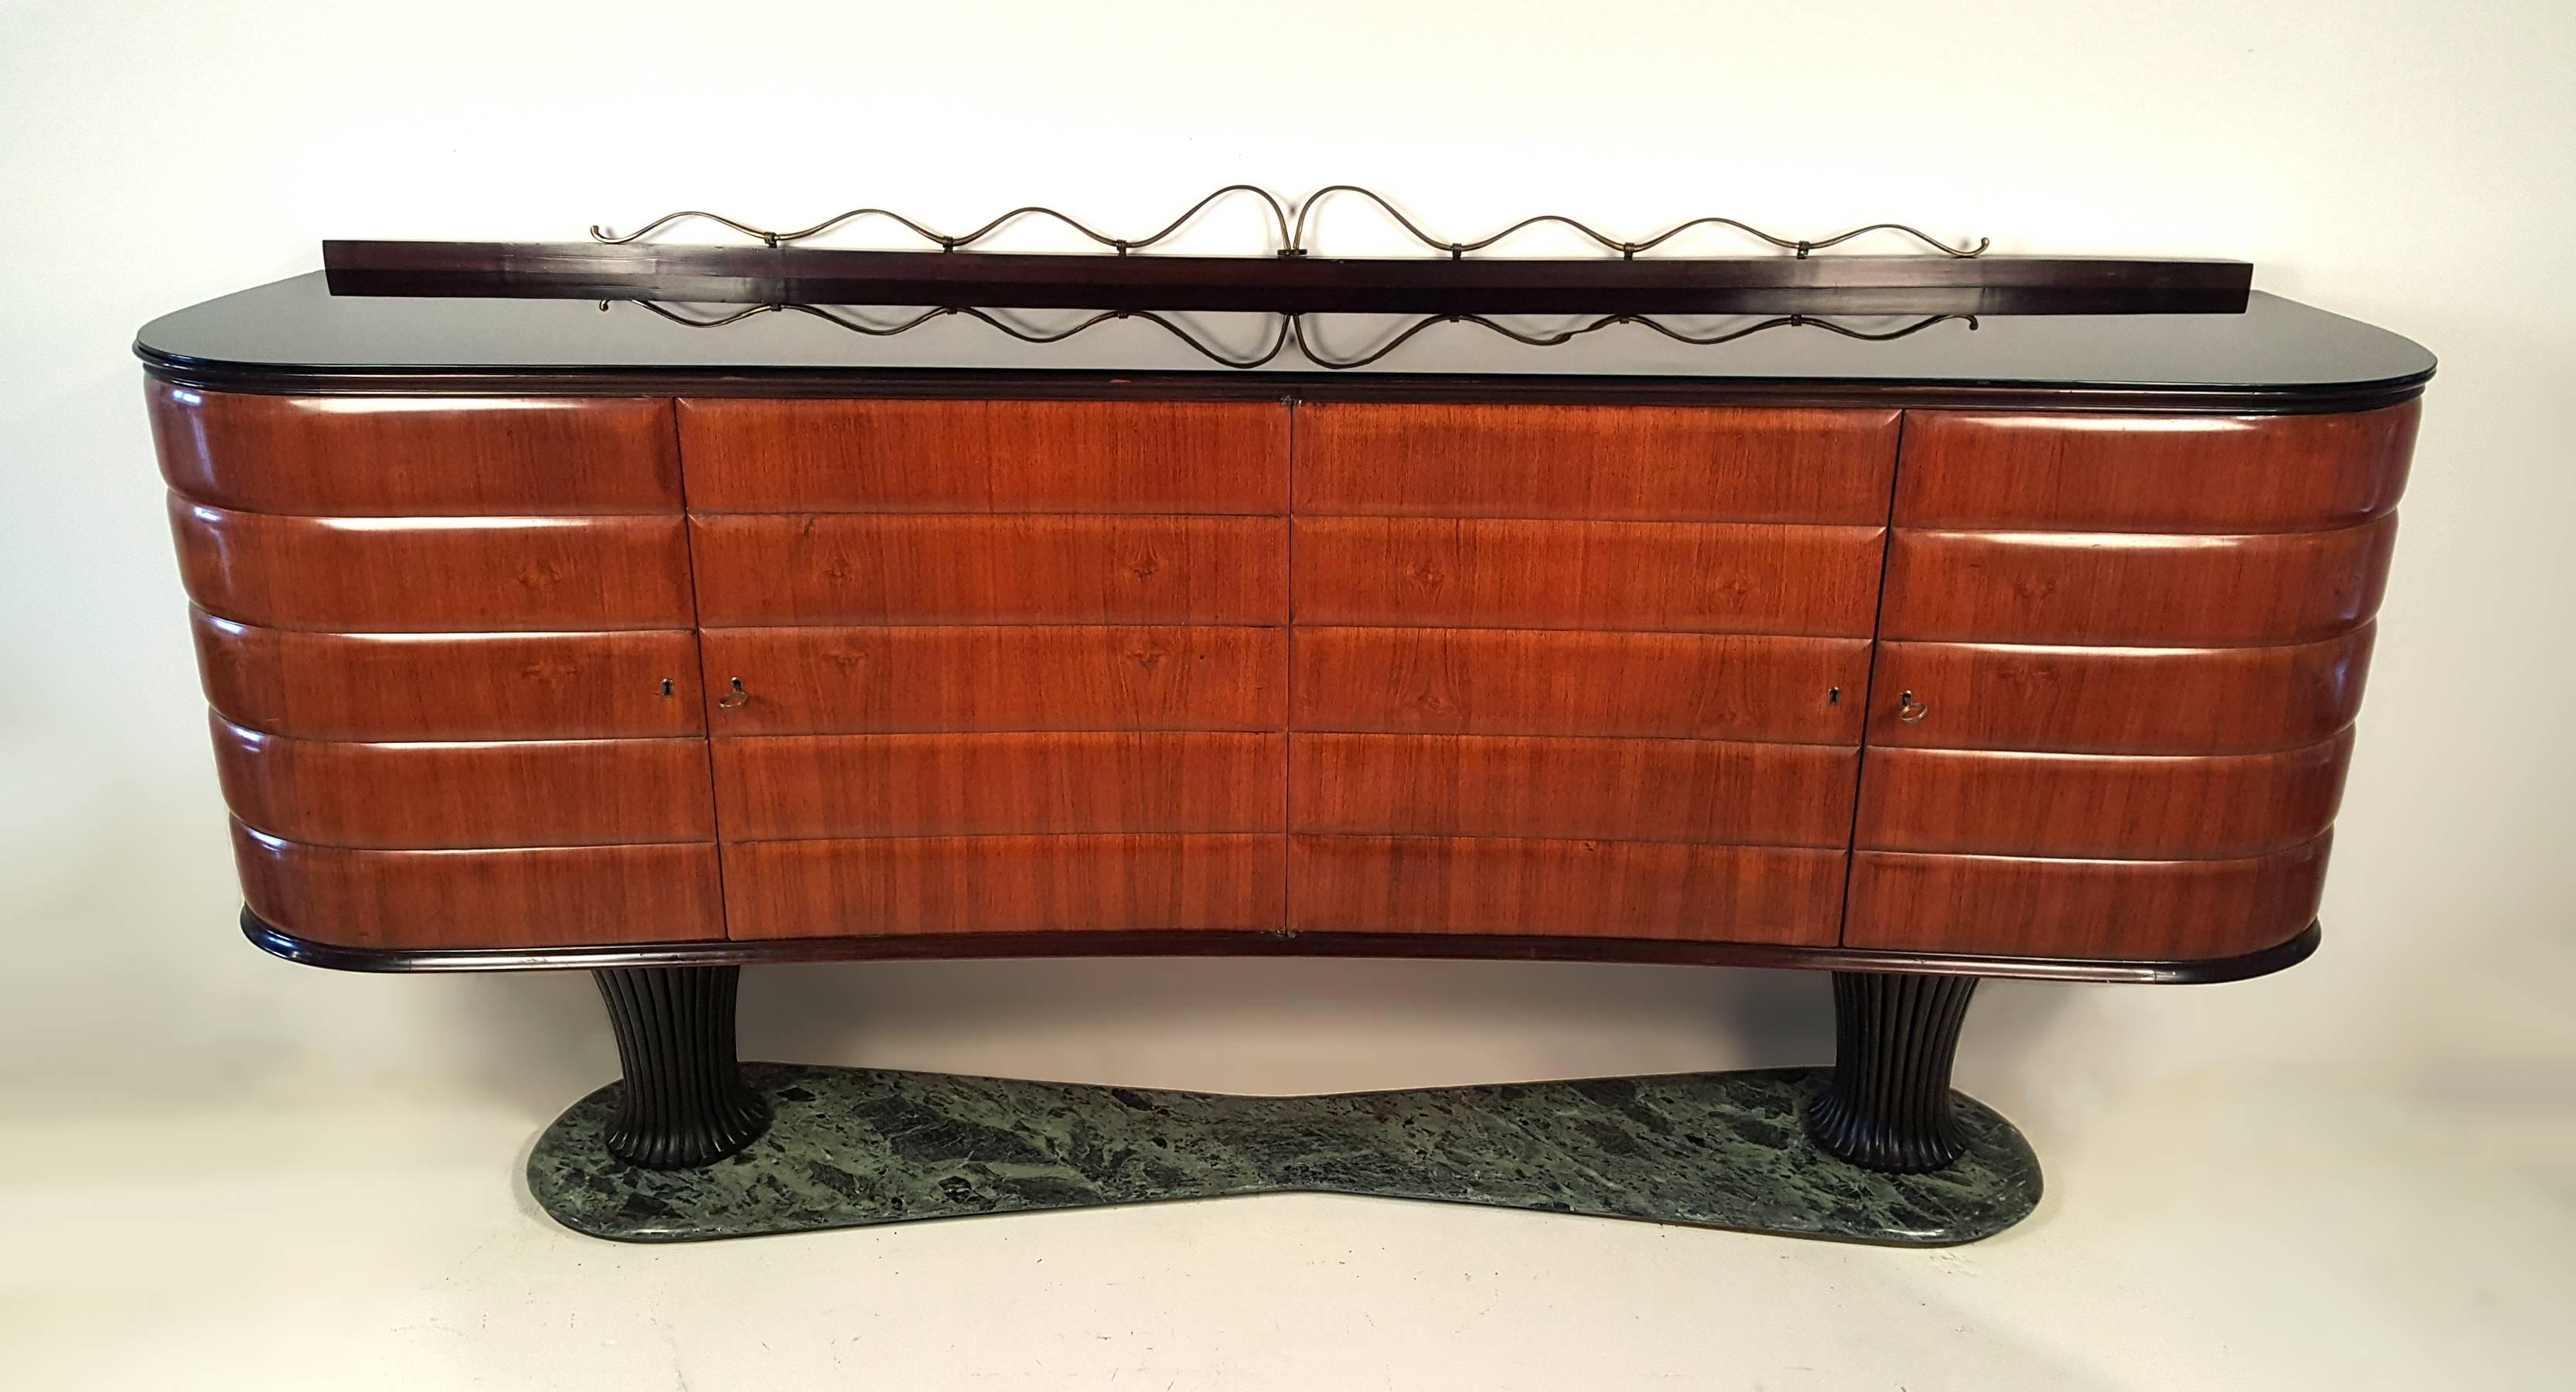 A phenomenal early Italian modernist server in sculpted Italian walnut with hand-carved mahogany bases, black milk glass top, hand-forged solid brass ornamentation and verde marble base with brushed brass reveal. An elegant and functional piece of